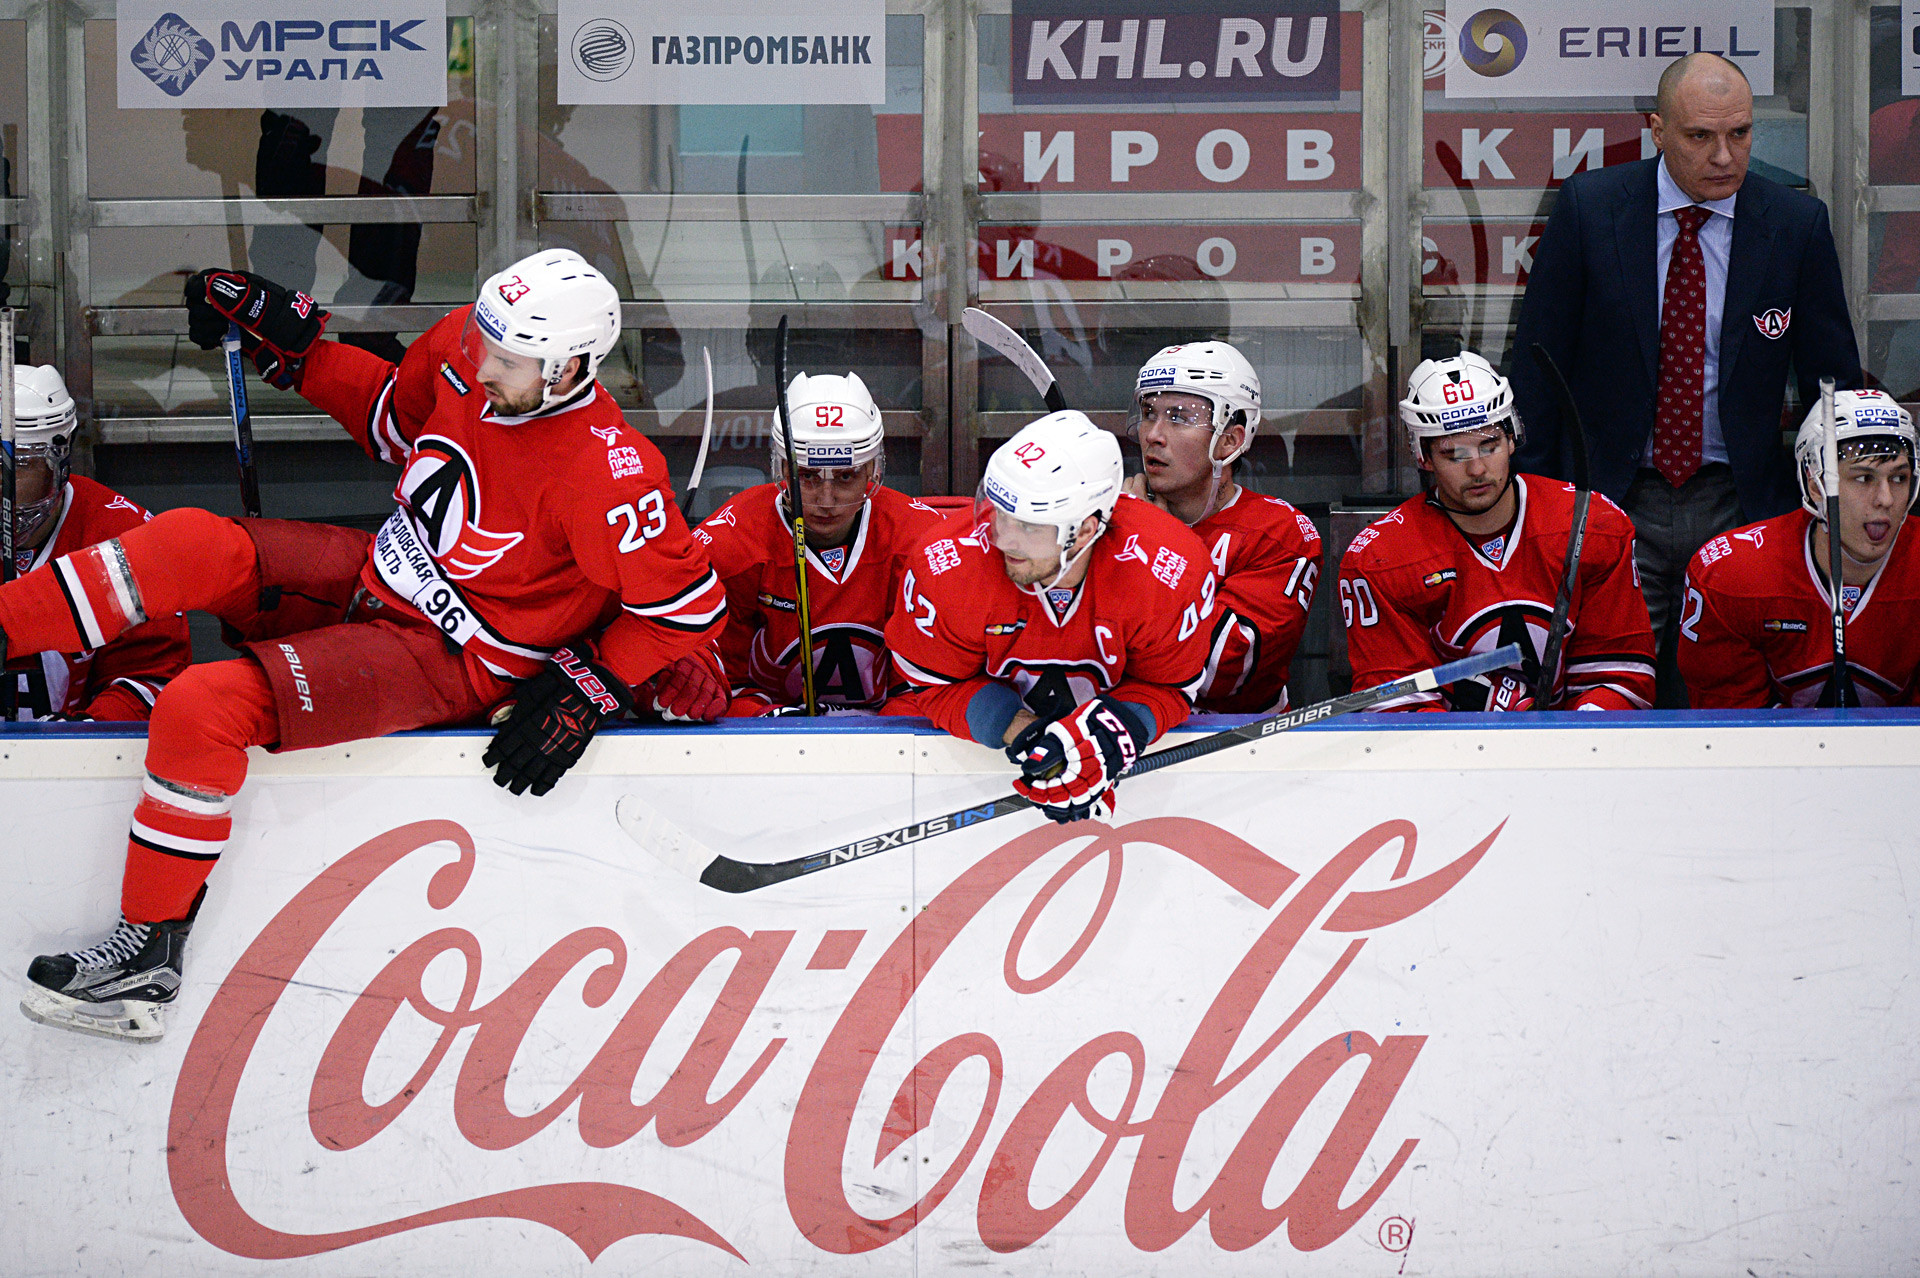 Coca Cola, known for its support to sporting events, is a partner of the Kontinental Hockey League (KHL) headquartered in Moscow. Being an official drink of the KHL it gets an extra boost to its image in the country.